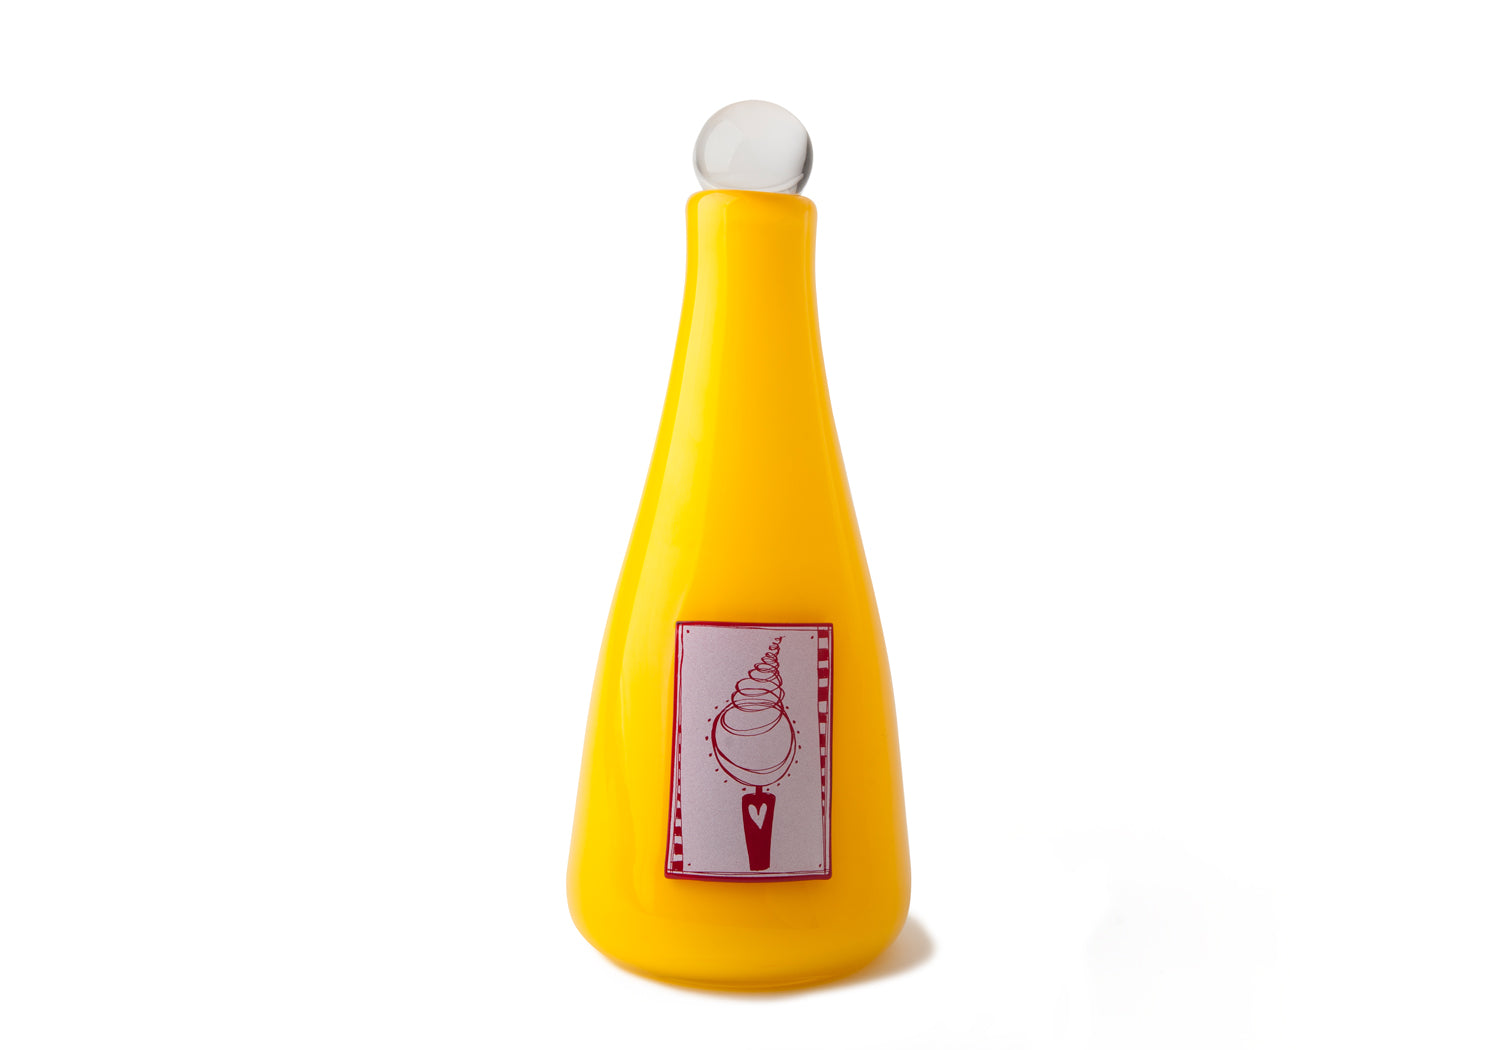 Picture of a bright yellow blown glass vase cremation urn for children on sale at Muses Design Urns. Front view.